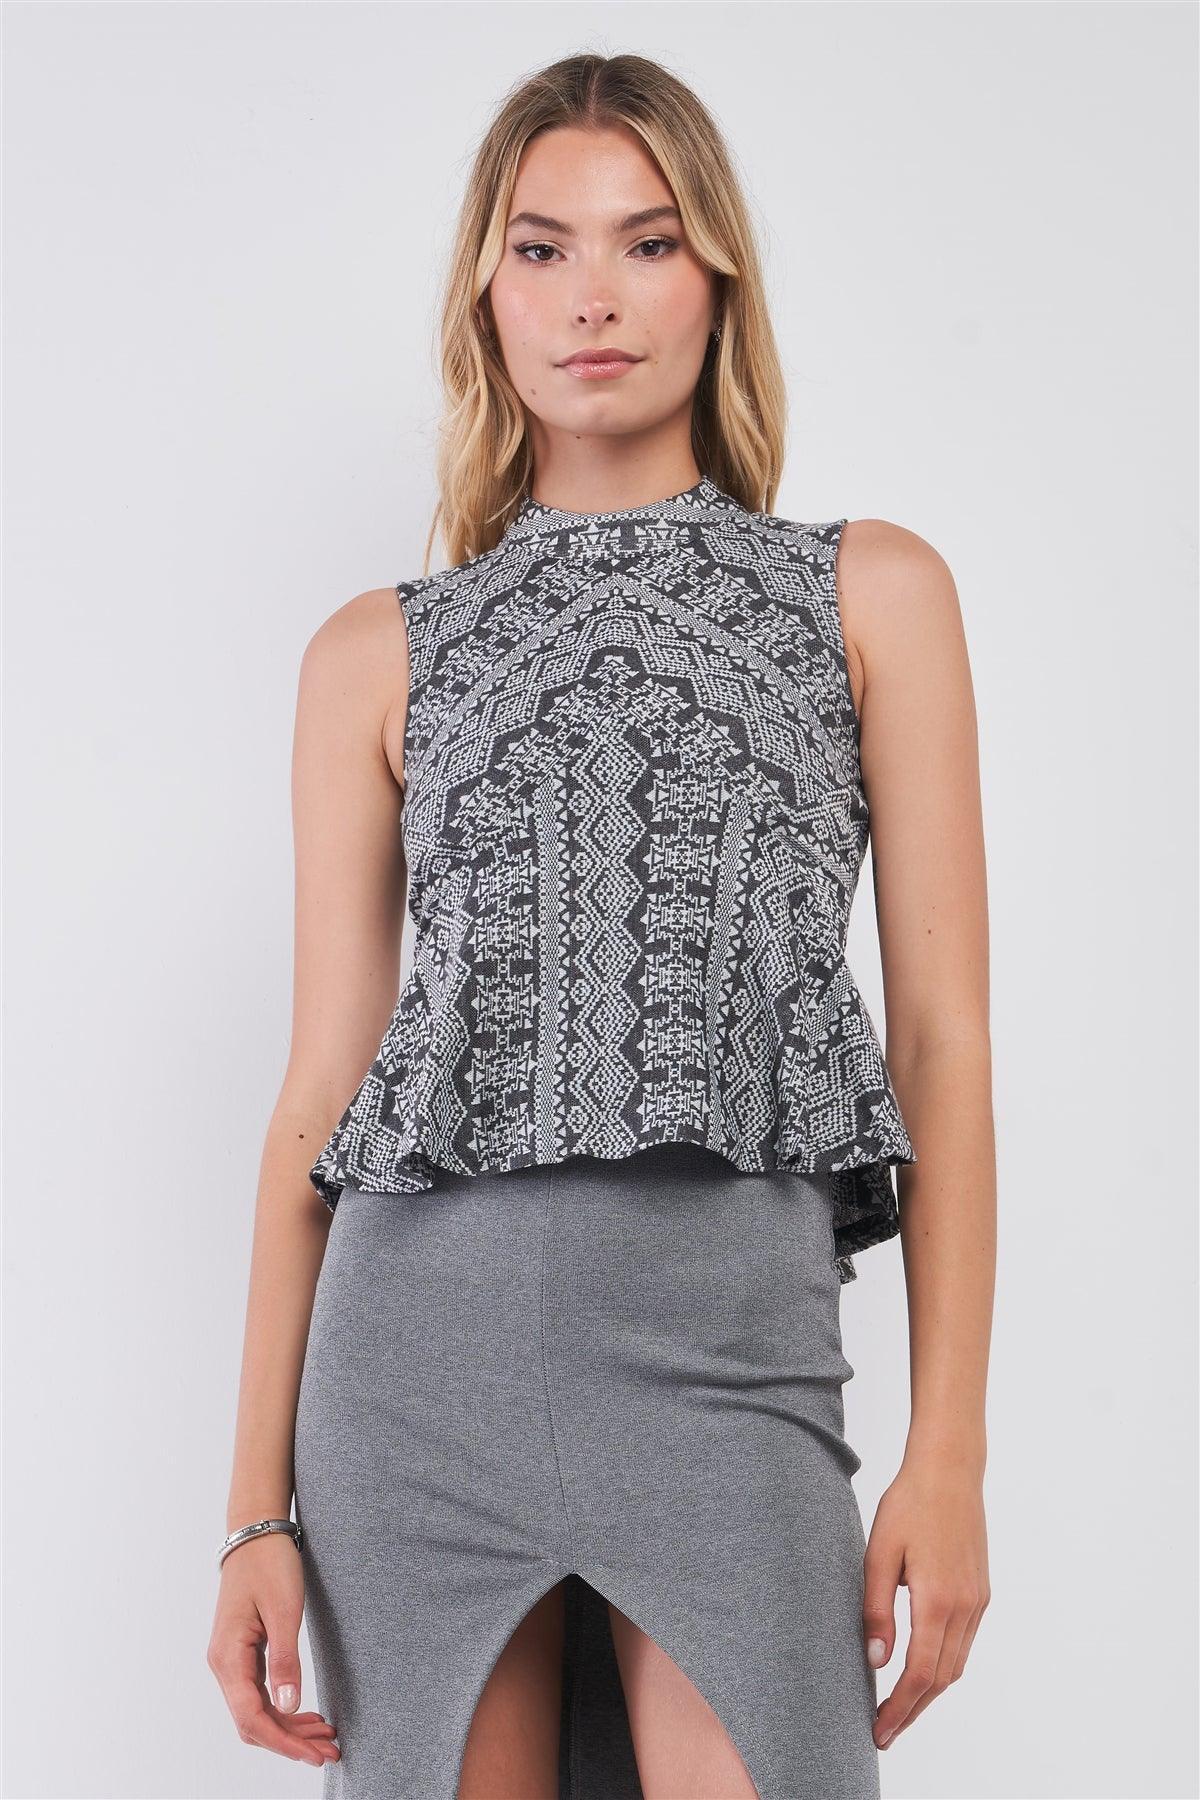 Charcoal Grey Damask-Inspired Geometric Pattern Print Sleeveless Mock Neck Fit & Flare Top /1-2-2-1